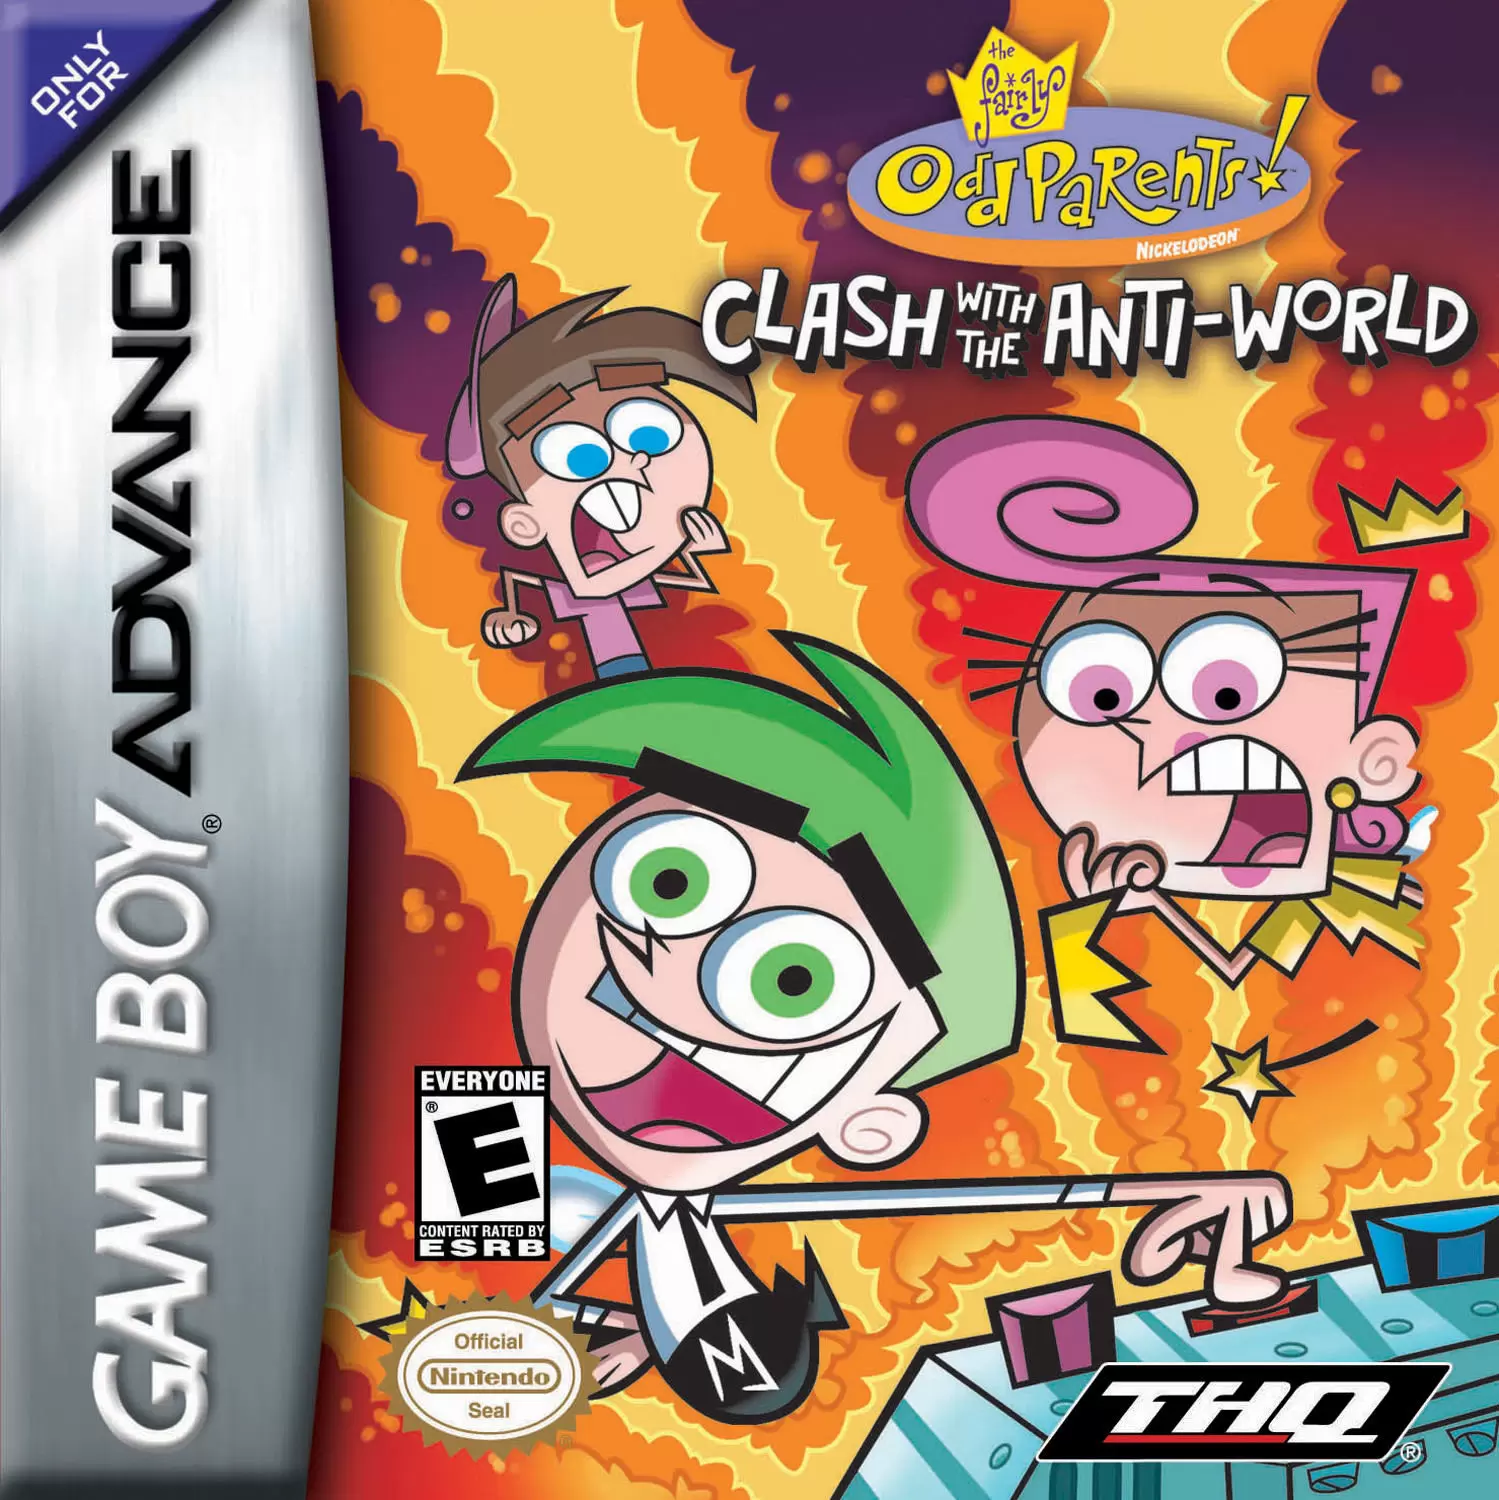 Game Boy Advance Games - The Fairly Odd Parents!: Clash With The Anti-World